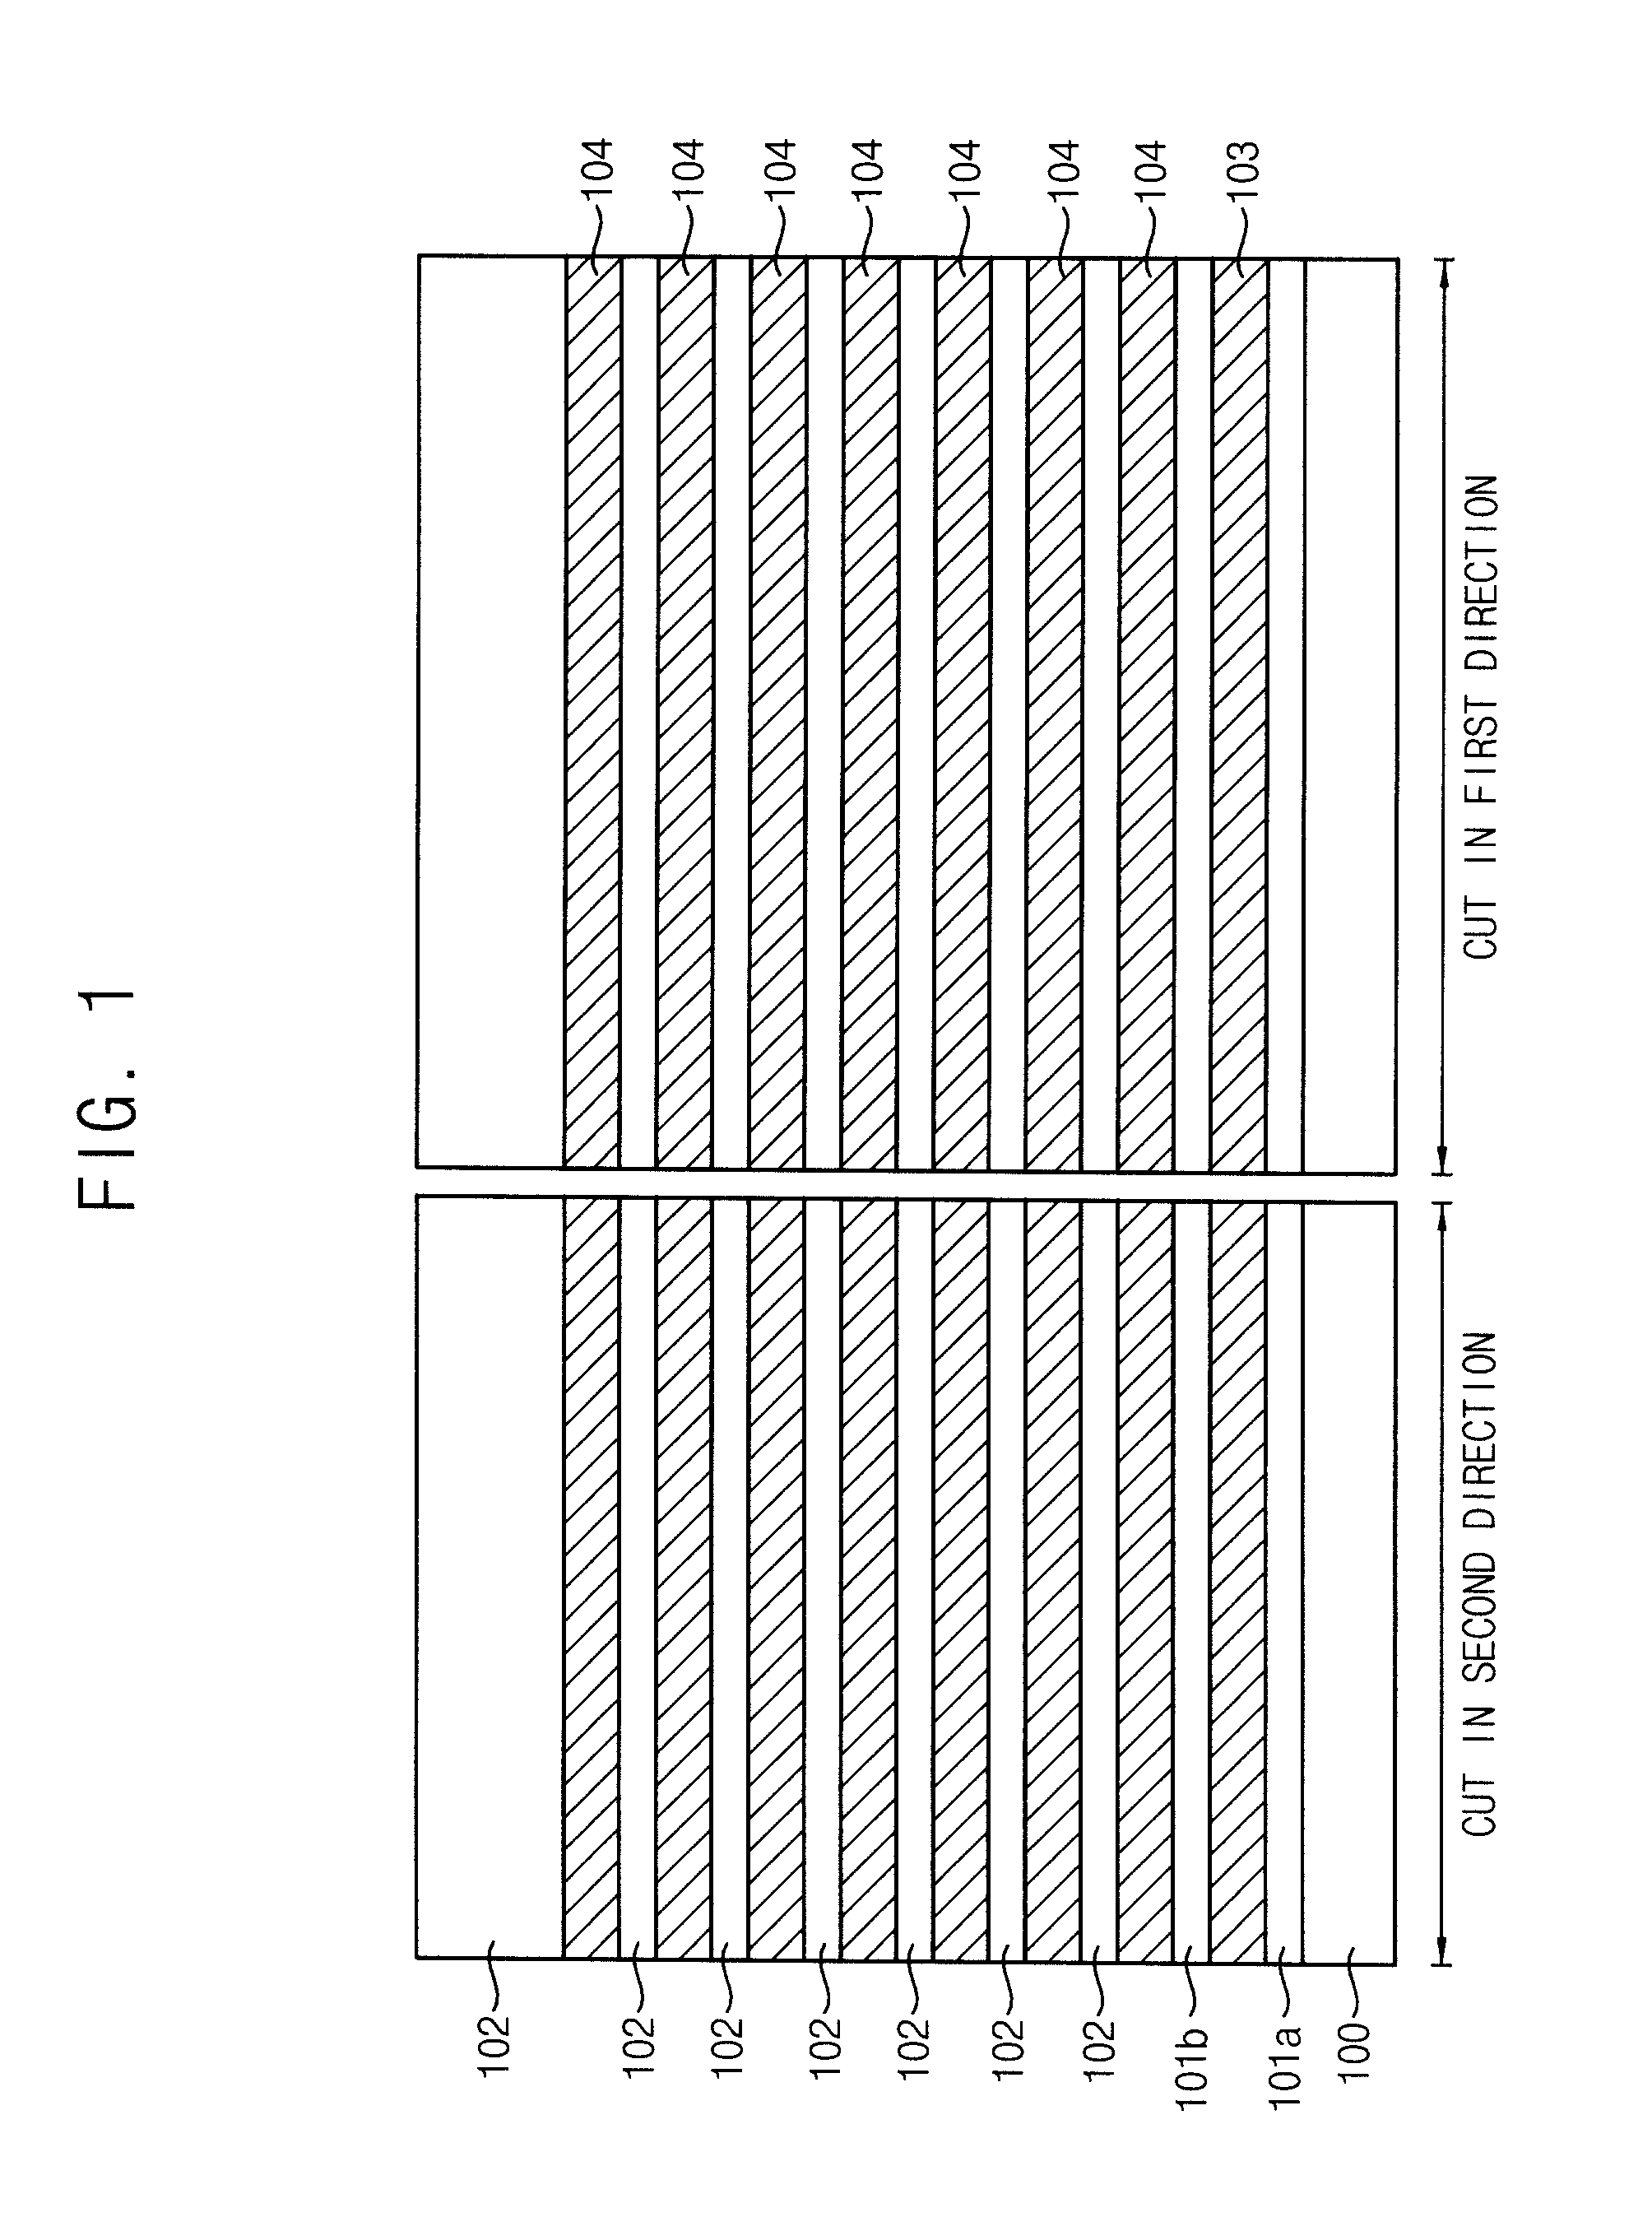 Methods of manufacturing a semiconductor device